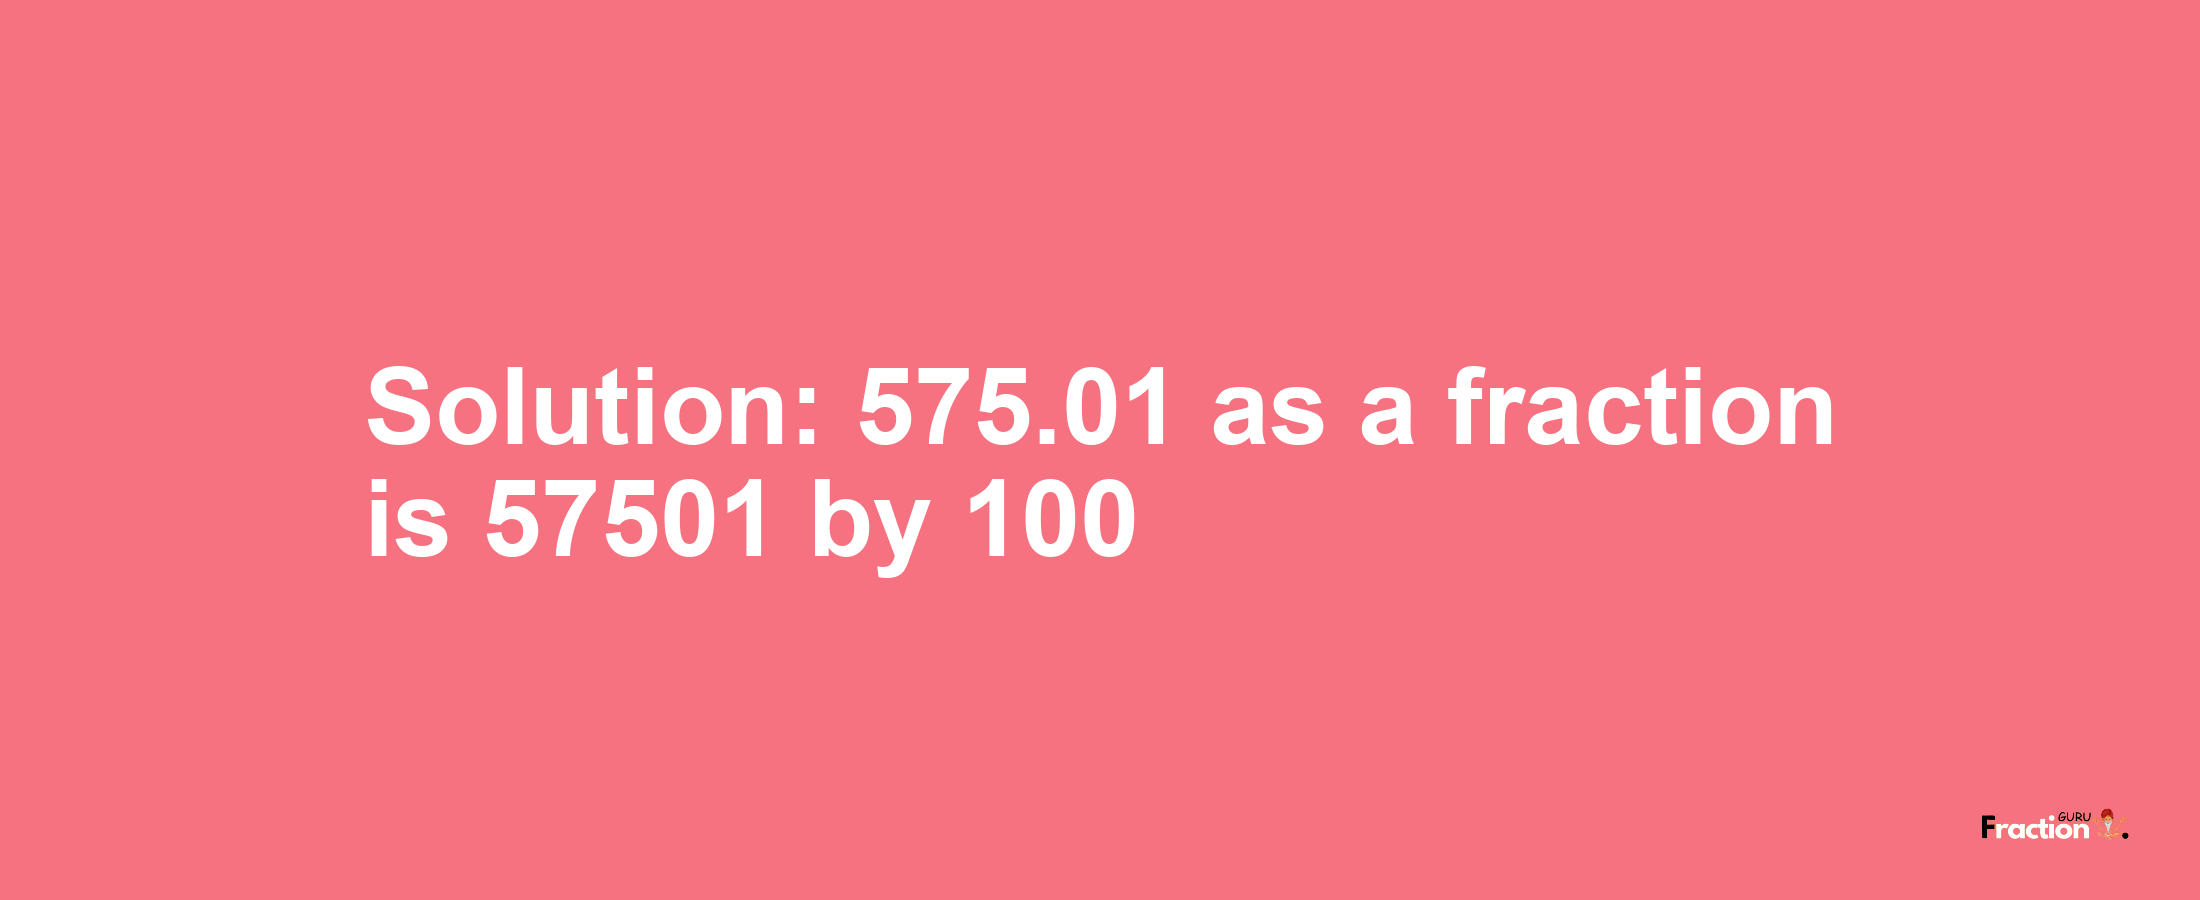 Solution:575.01 as a fraction is 57501/100